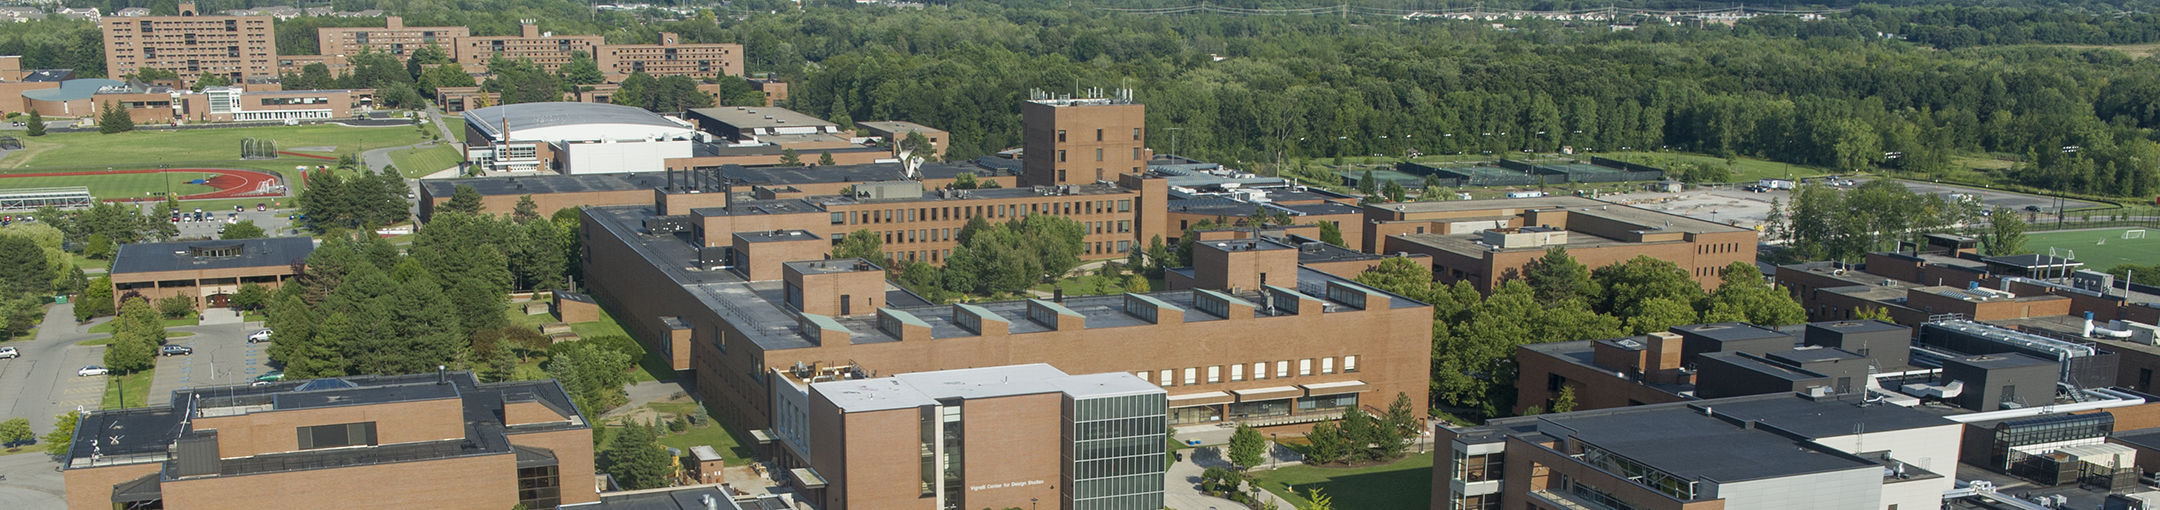 Aerial photo looking at Vignelli Center for Design Studies, James E. Booth Hall, George Eastman Hall, Gordon Field House, and a number of residence halls on RIT's Campus 